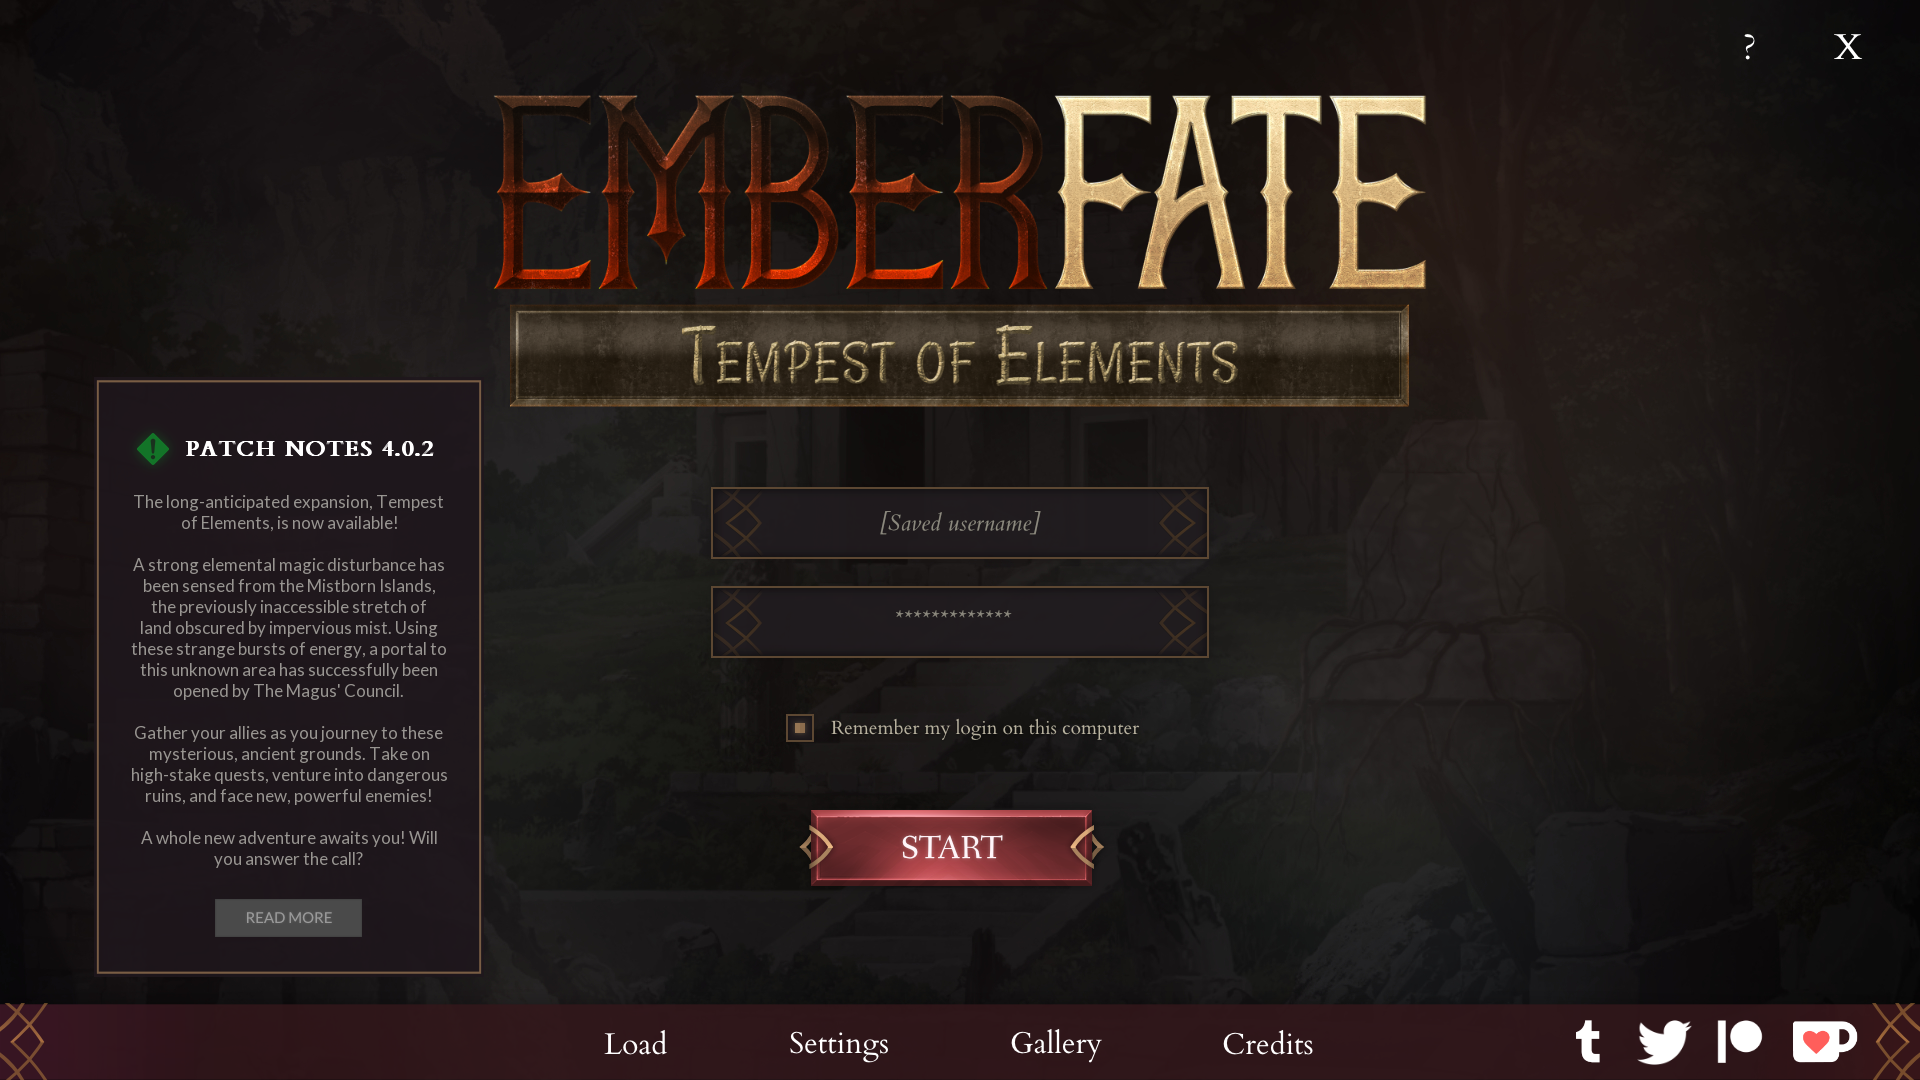 Emberfate: Tempest of Elements (DAY 7 OUT NOW)